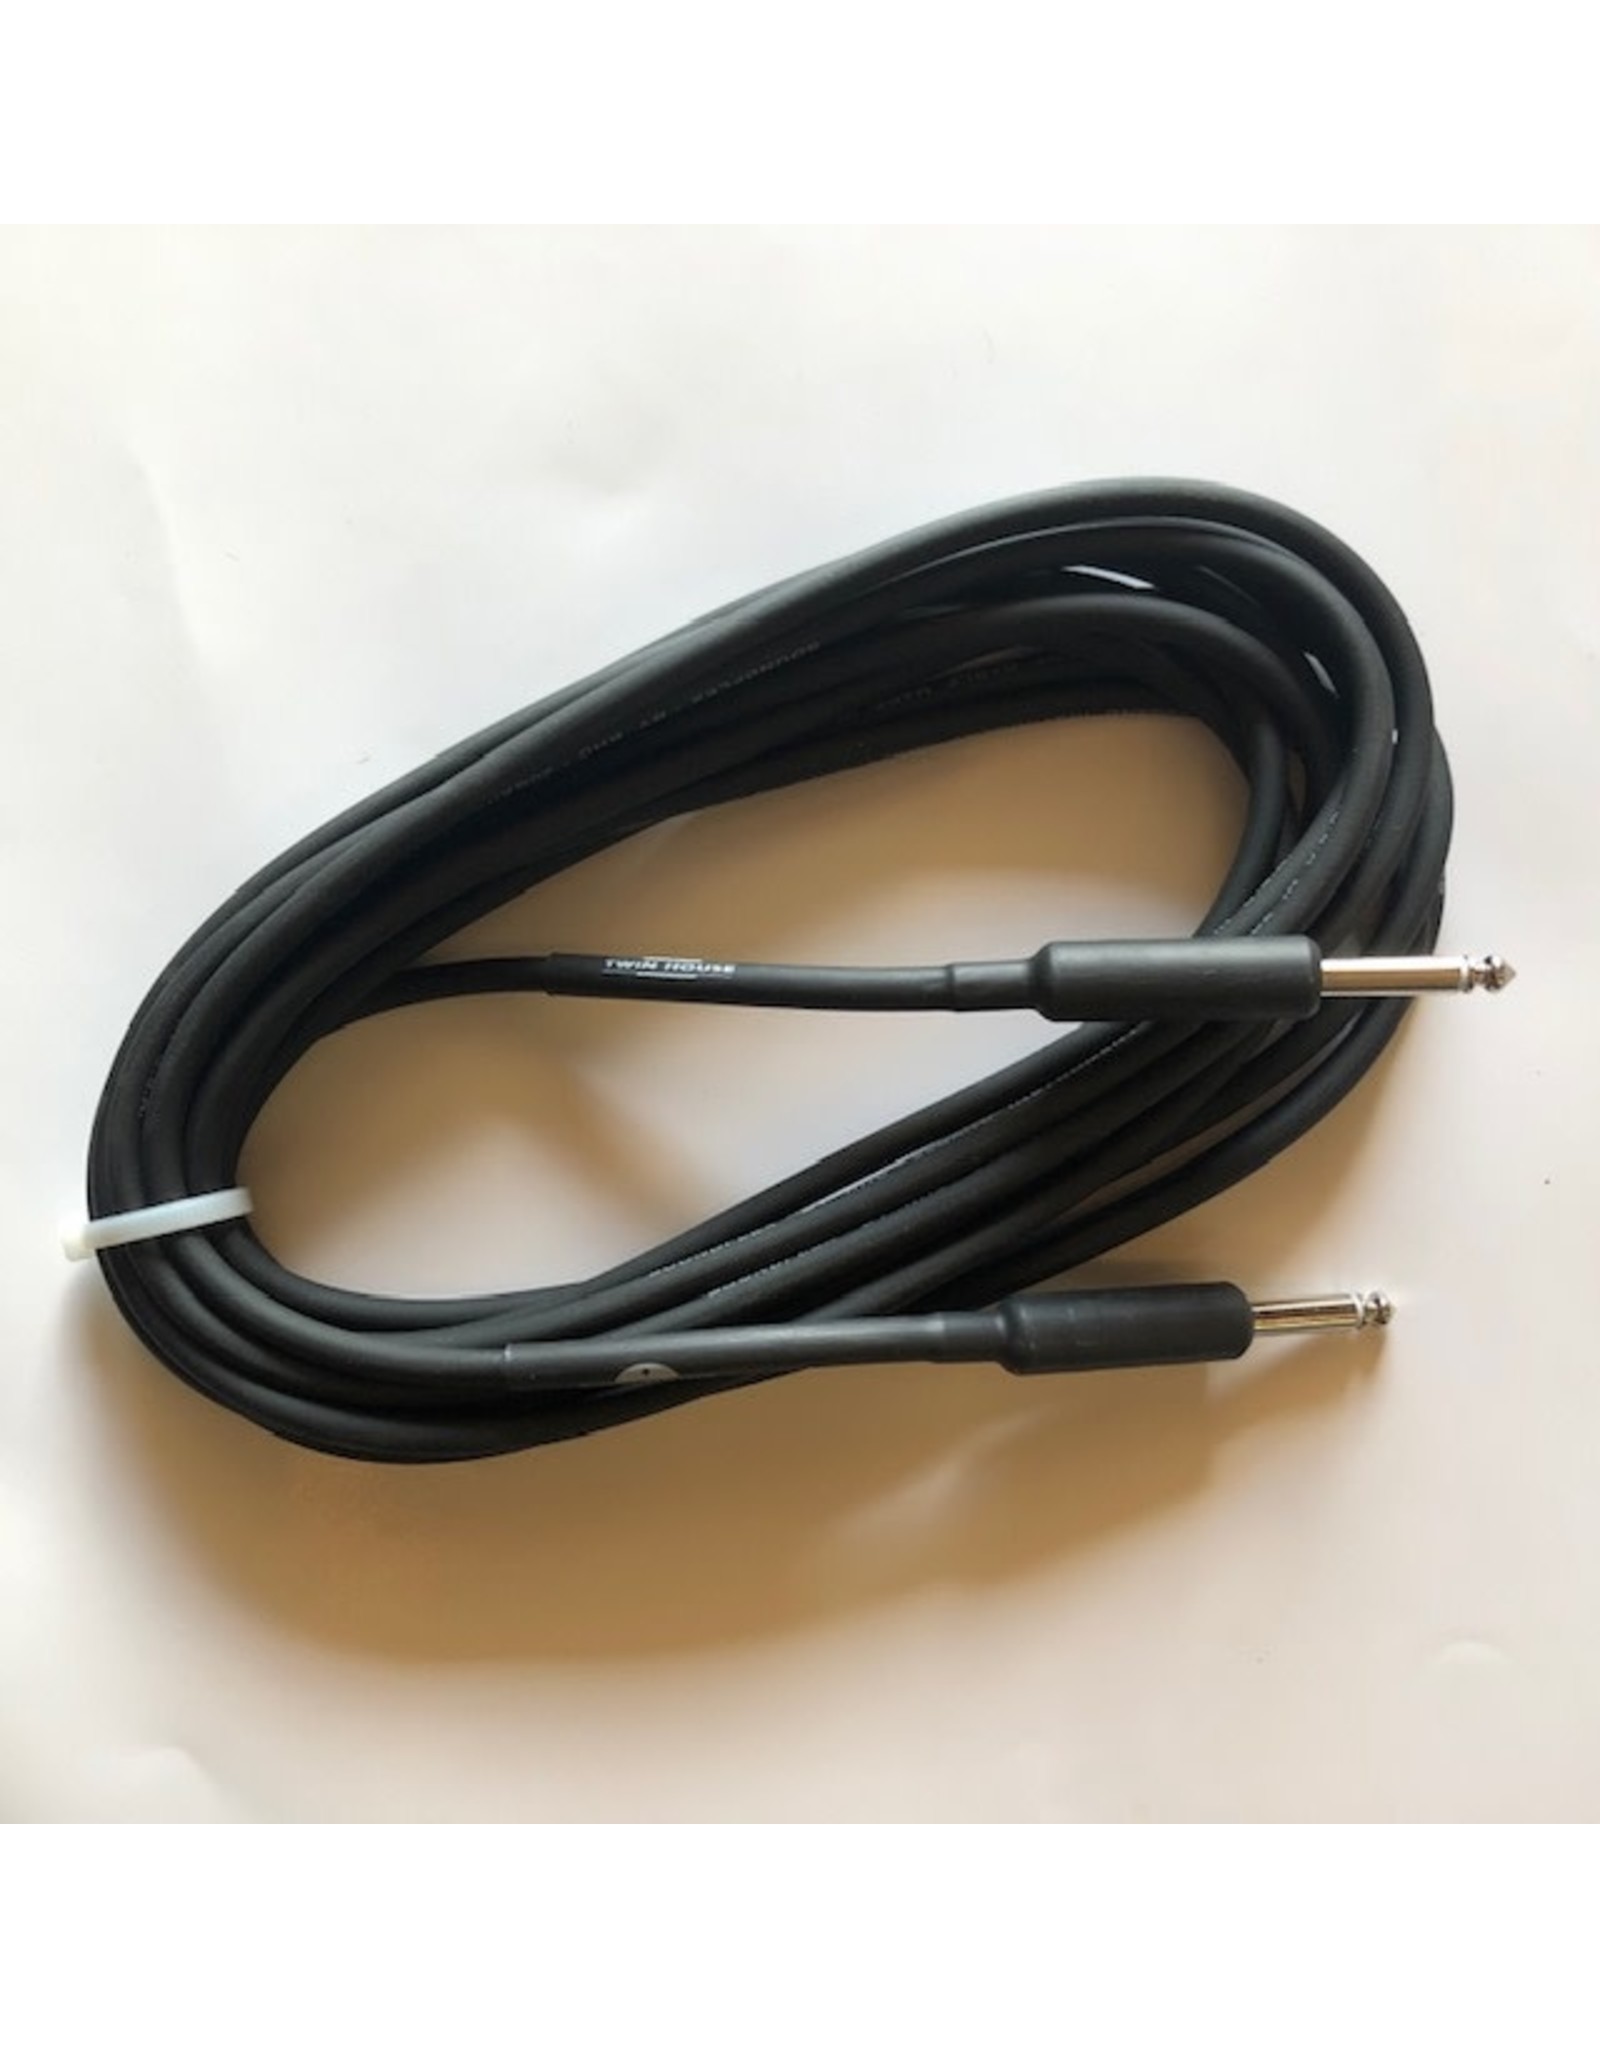 Rapco 1/4" to 1/4"   Instrument Cable 20 Ft Straight to Straight, Black Shrink